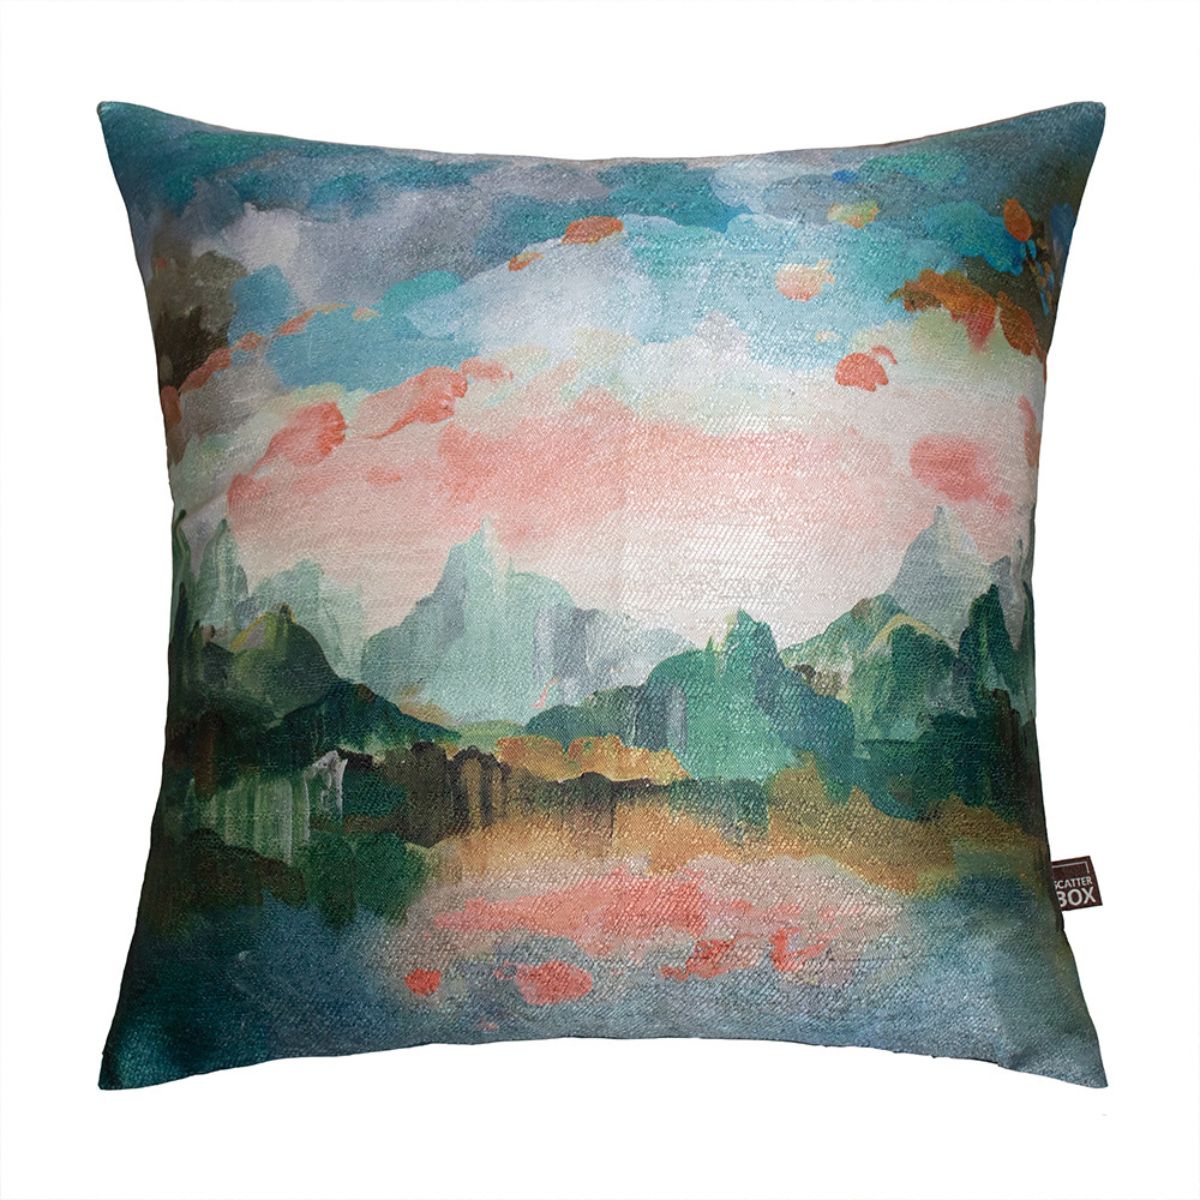 Borneo Pink and Teal Nature Cushion - 1